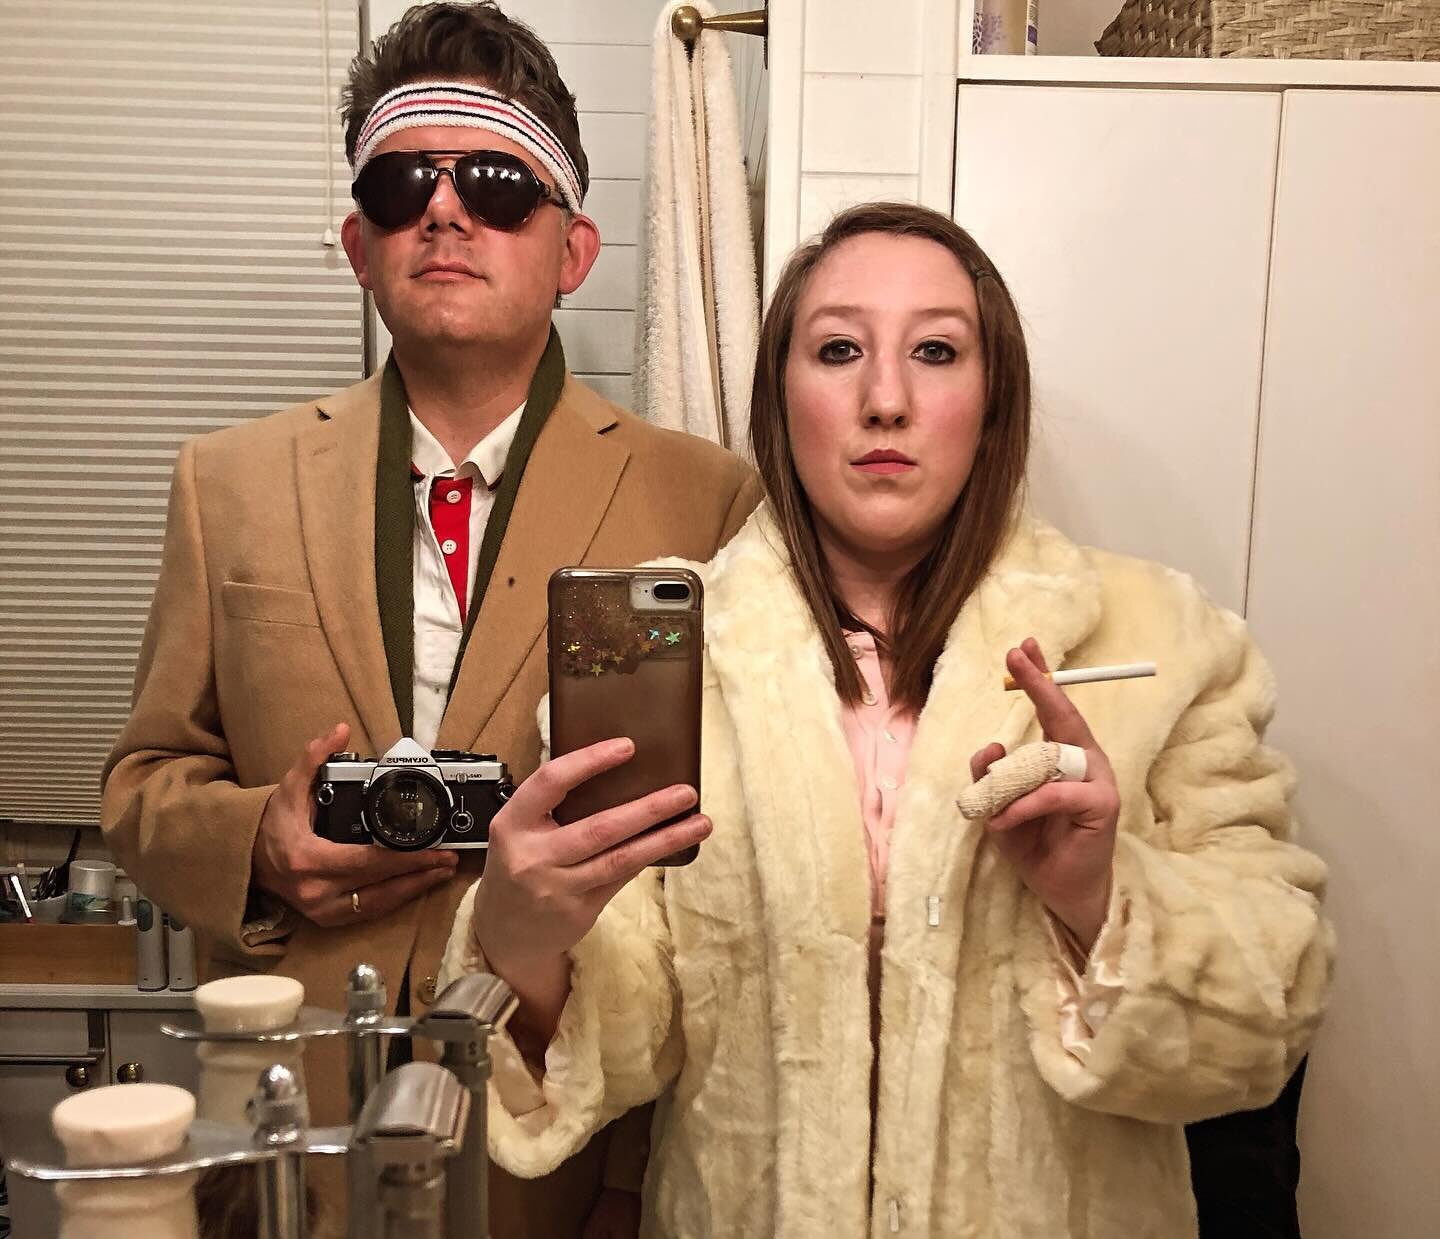 Also available for costume party house shows. Tenenbaum murder mystery with folk ballads? Anyone?!